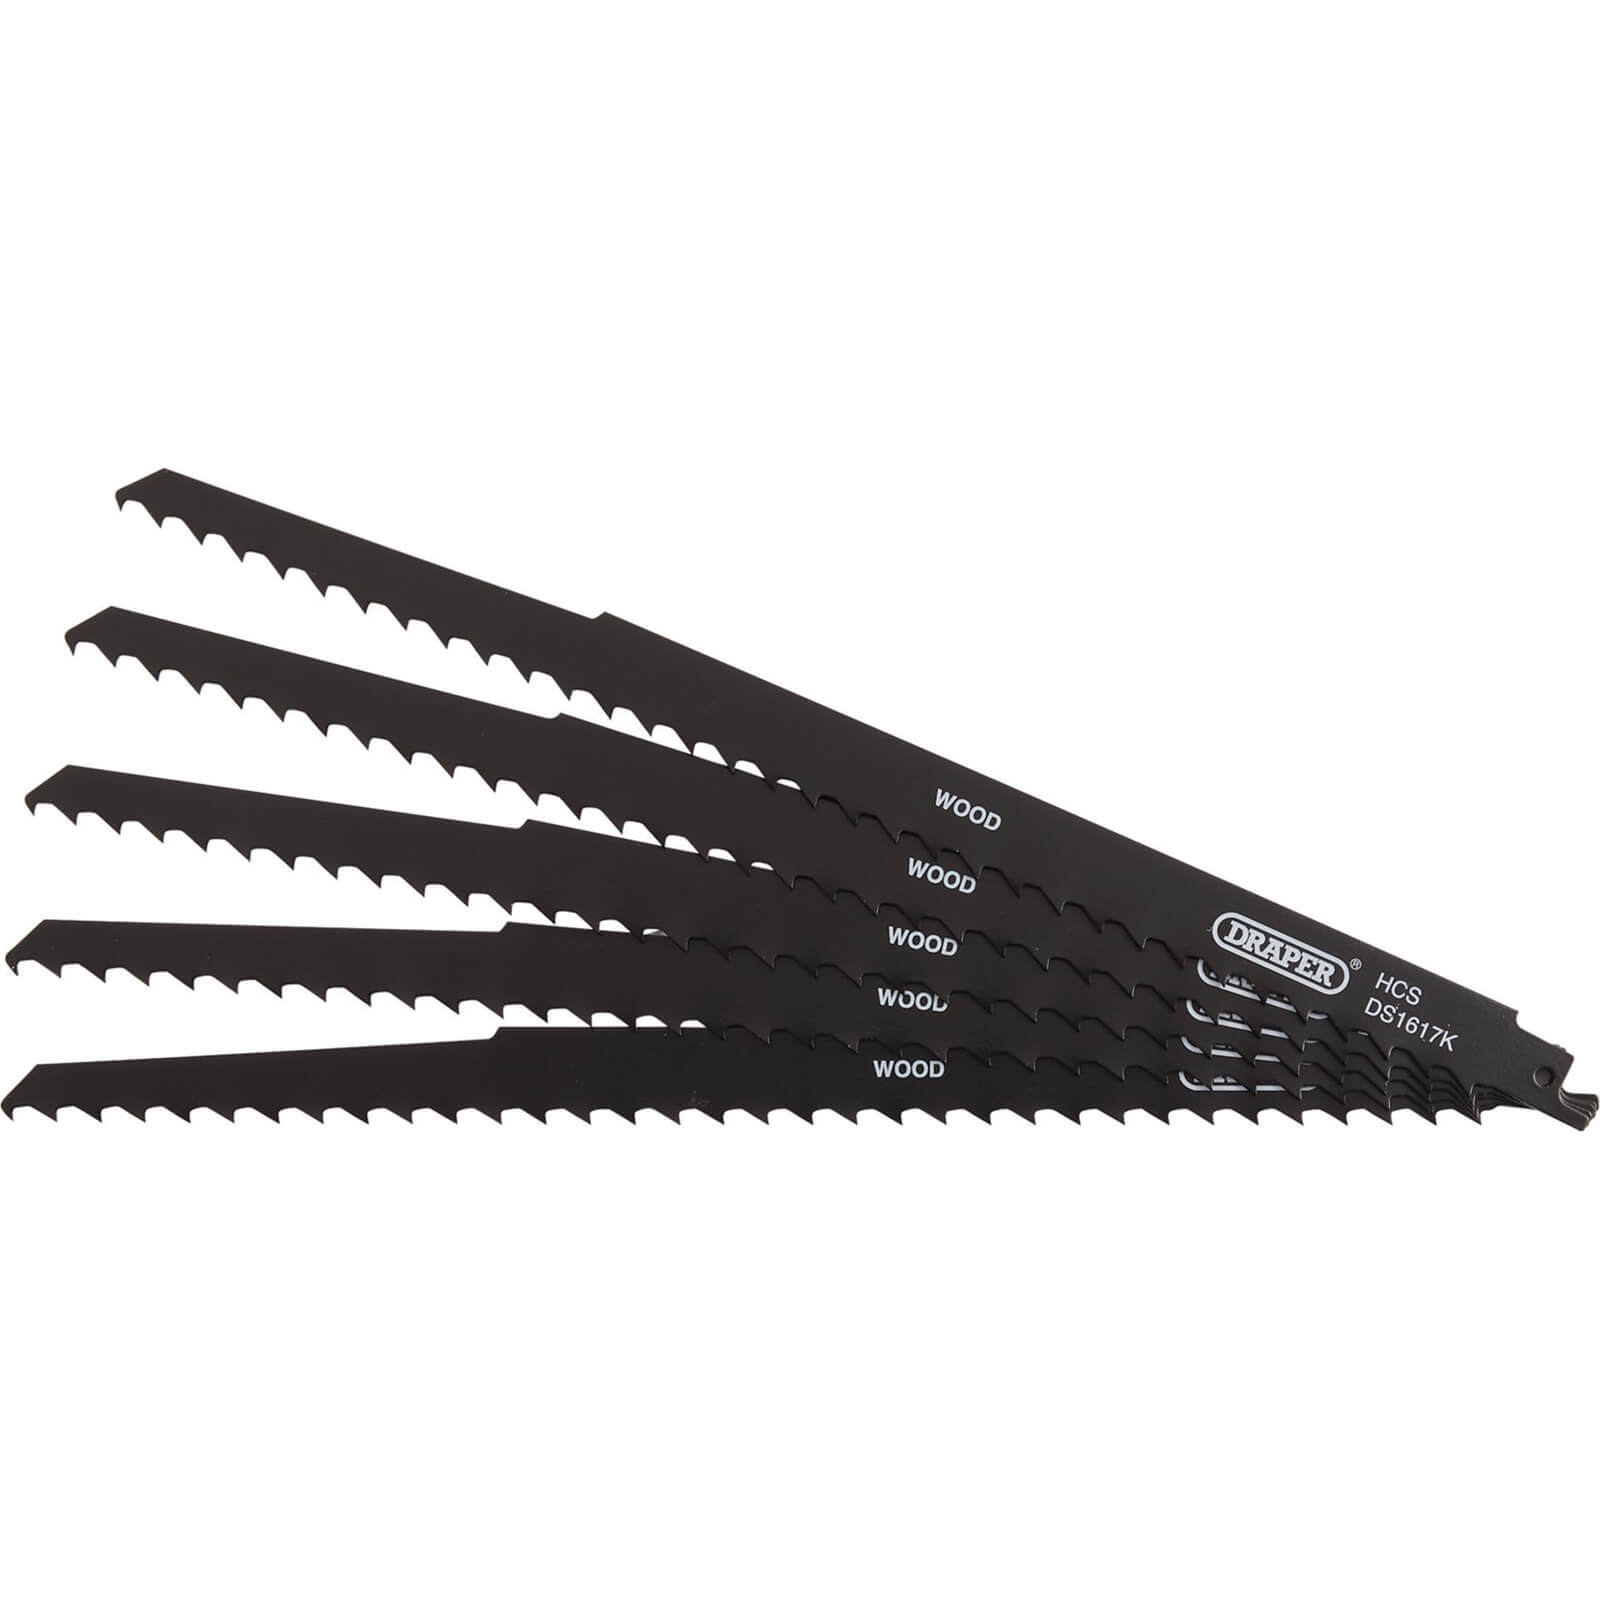 Image of Draper Tree Pruning Reciprocating Sabre Saw Blades 300mm Pack of 5